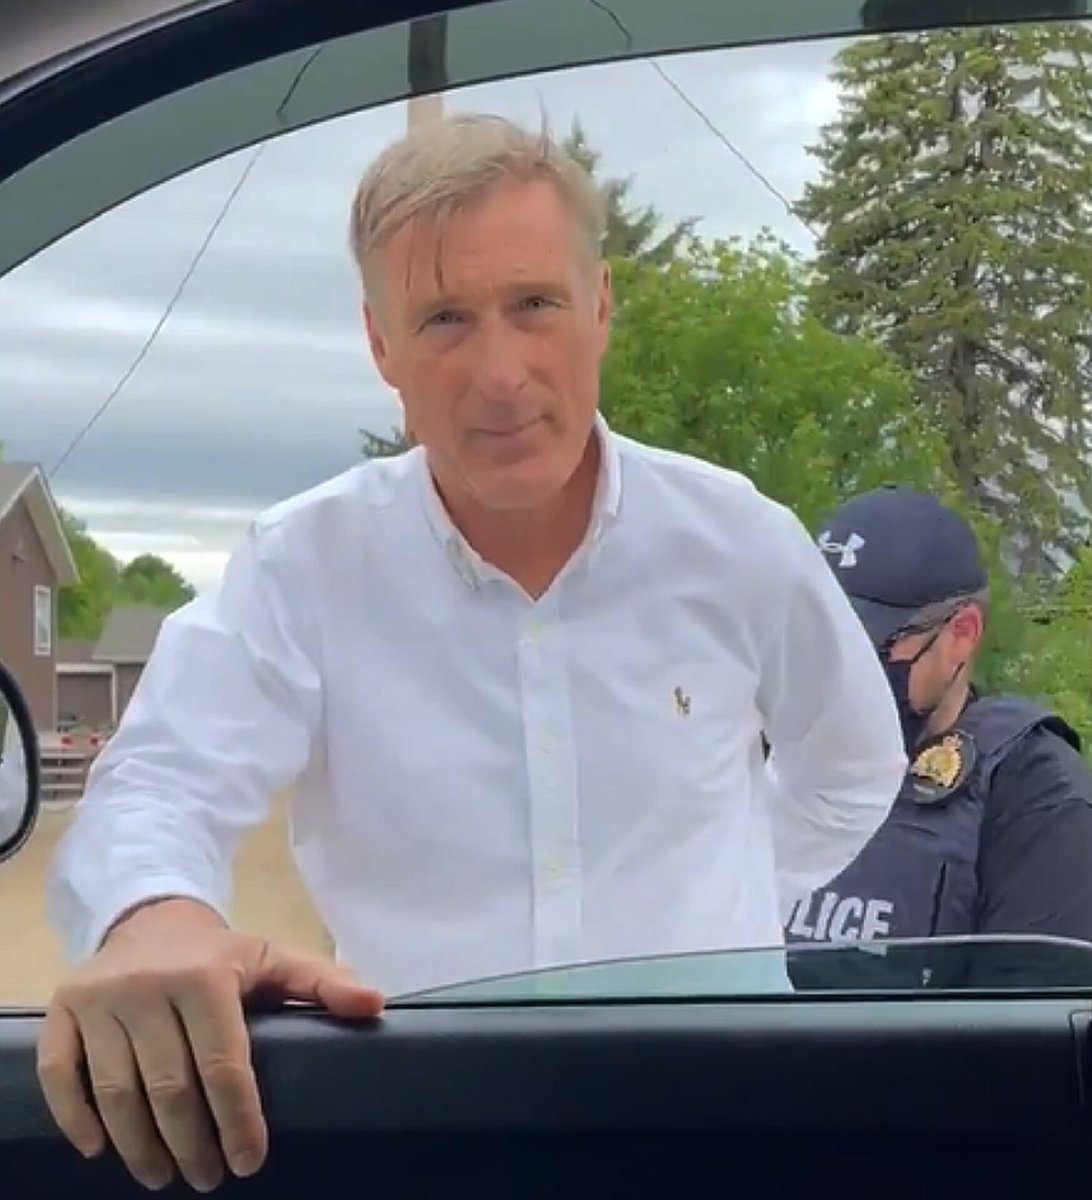 The only candidate for freedom, anti-corruption, and actual democracy was arrested during the 2021 election and unjustifiably banned from the public debates.

That candidate is Maxime Bernier, the leader of the People's Party, who continues to fight for all of our freedoms.